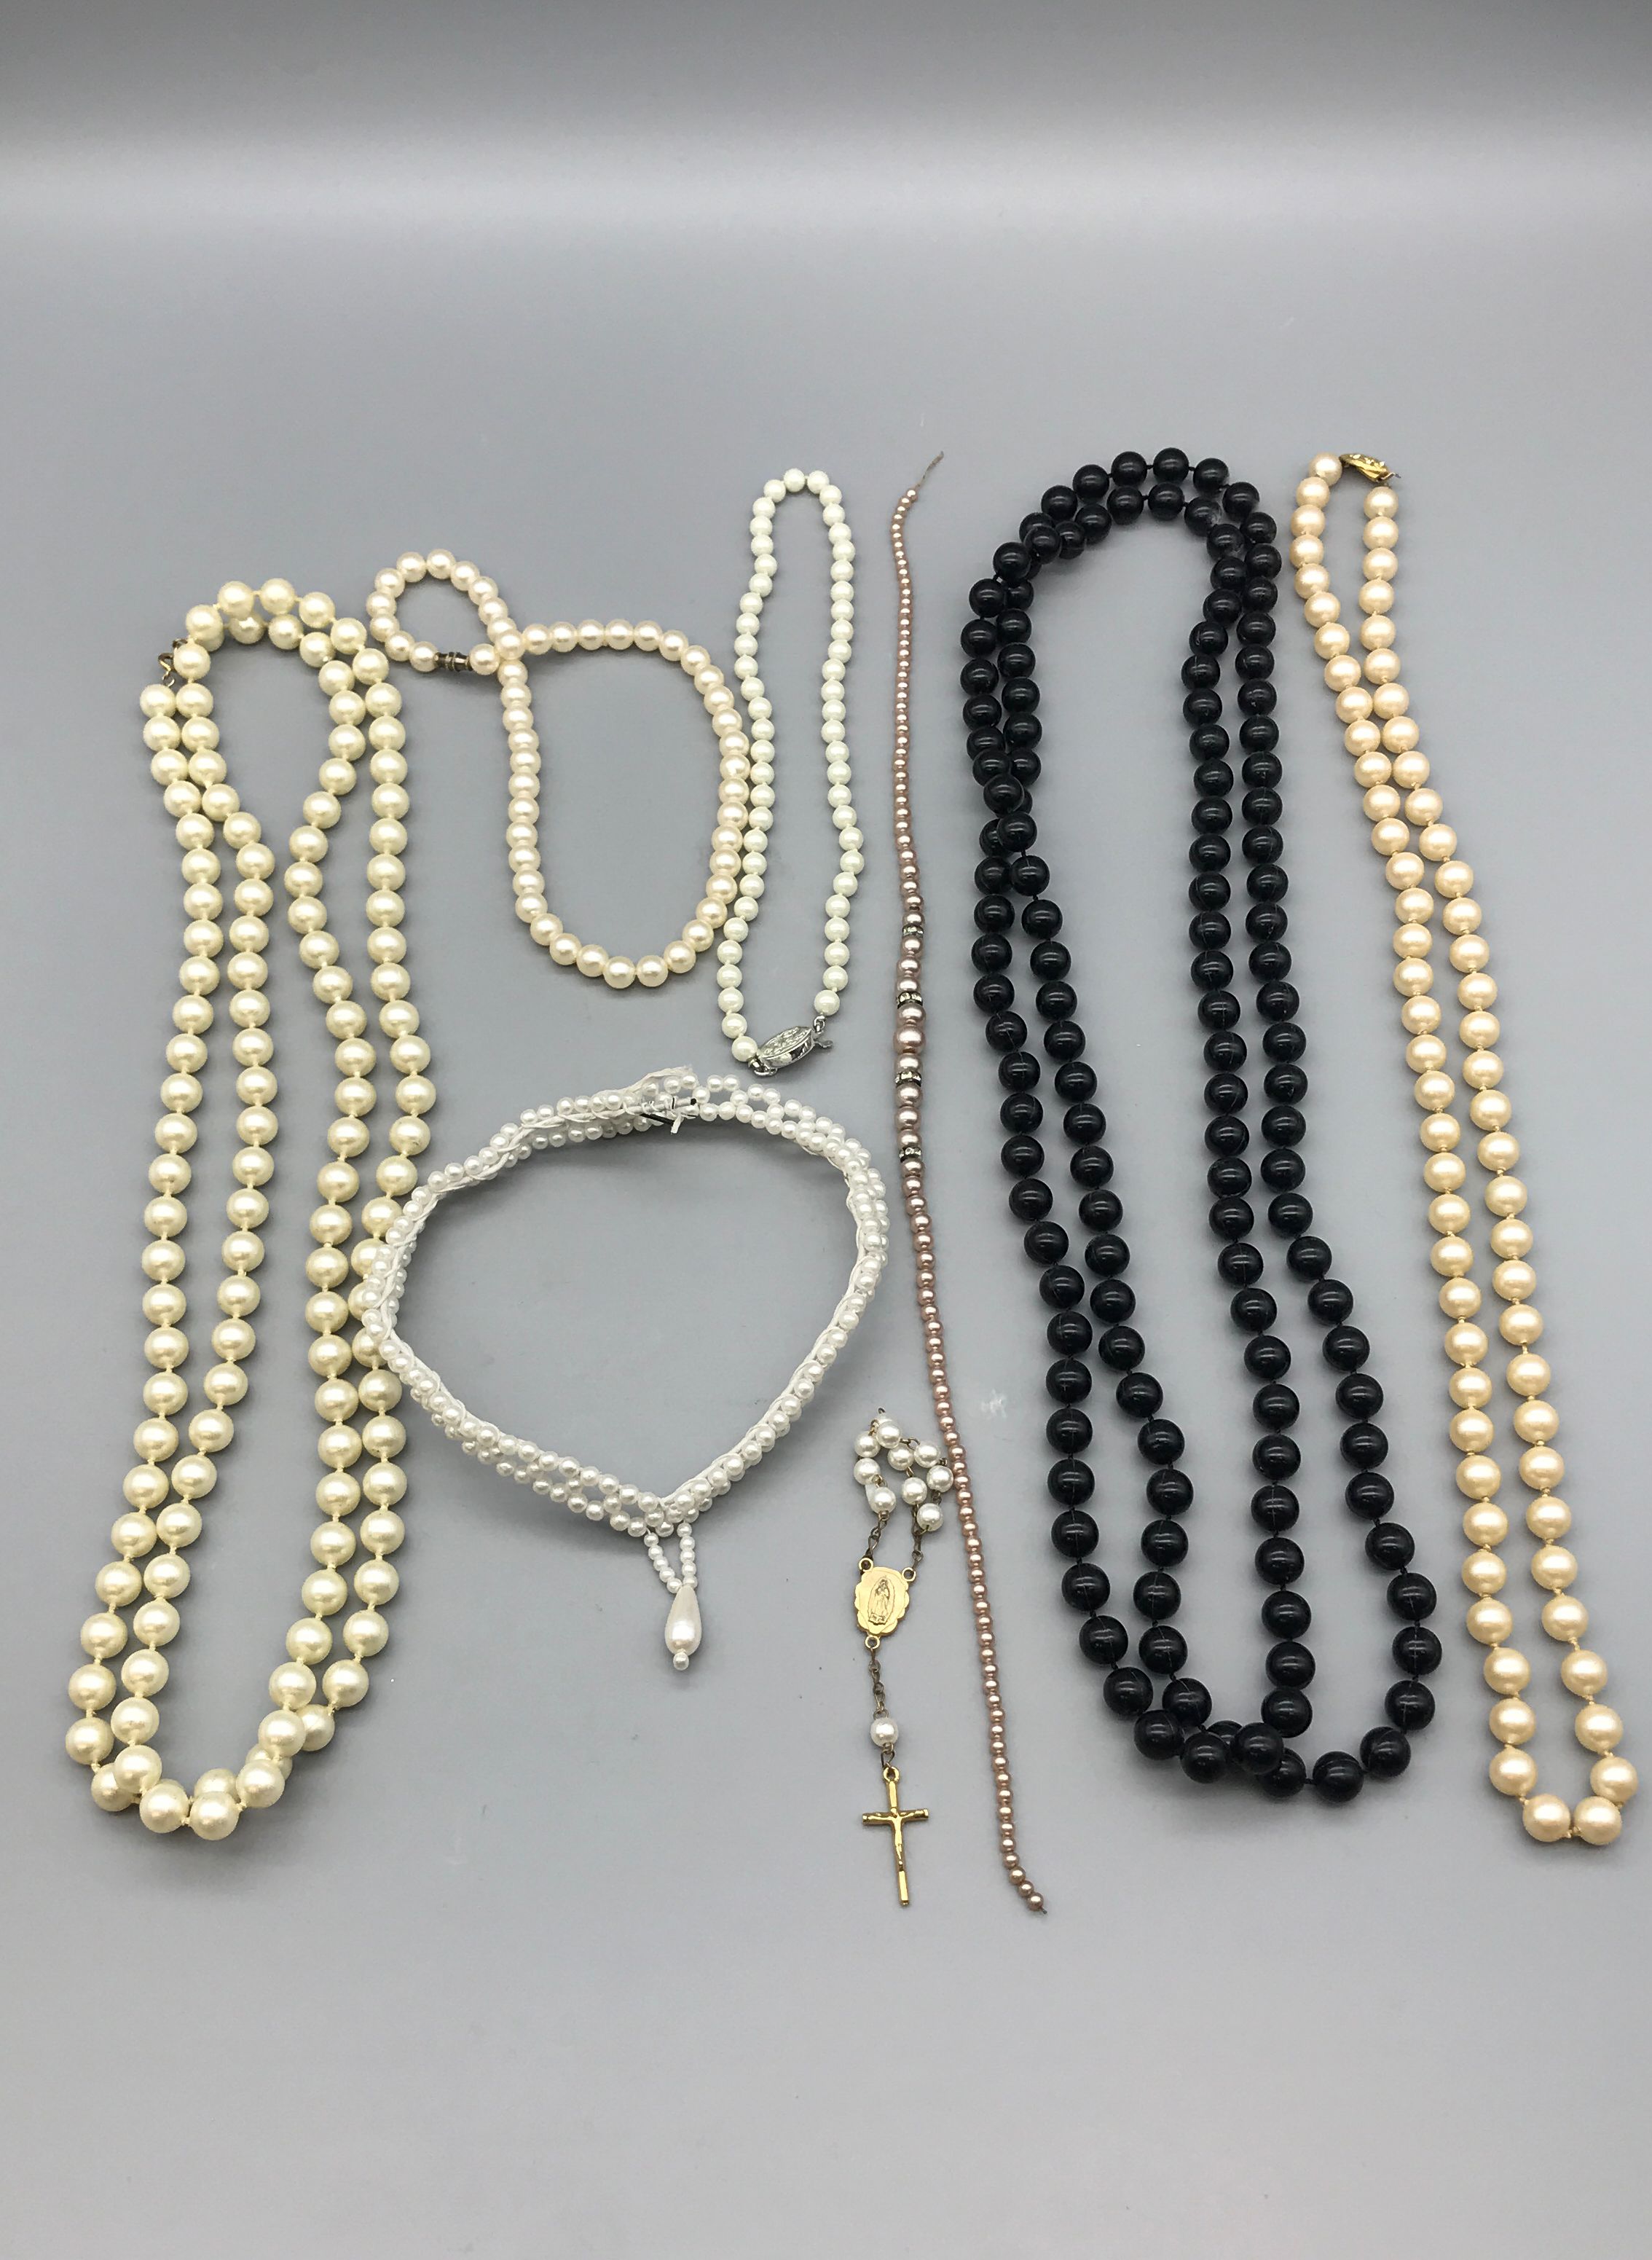 4.4 Pounds of Costume Jewelry- With Necklaces, Bracelets, Earrings, and more